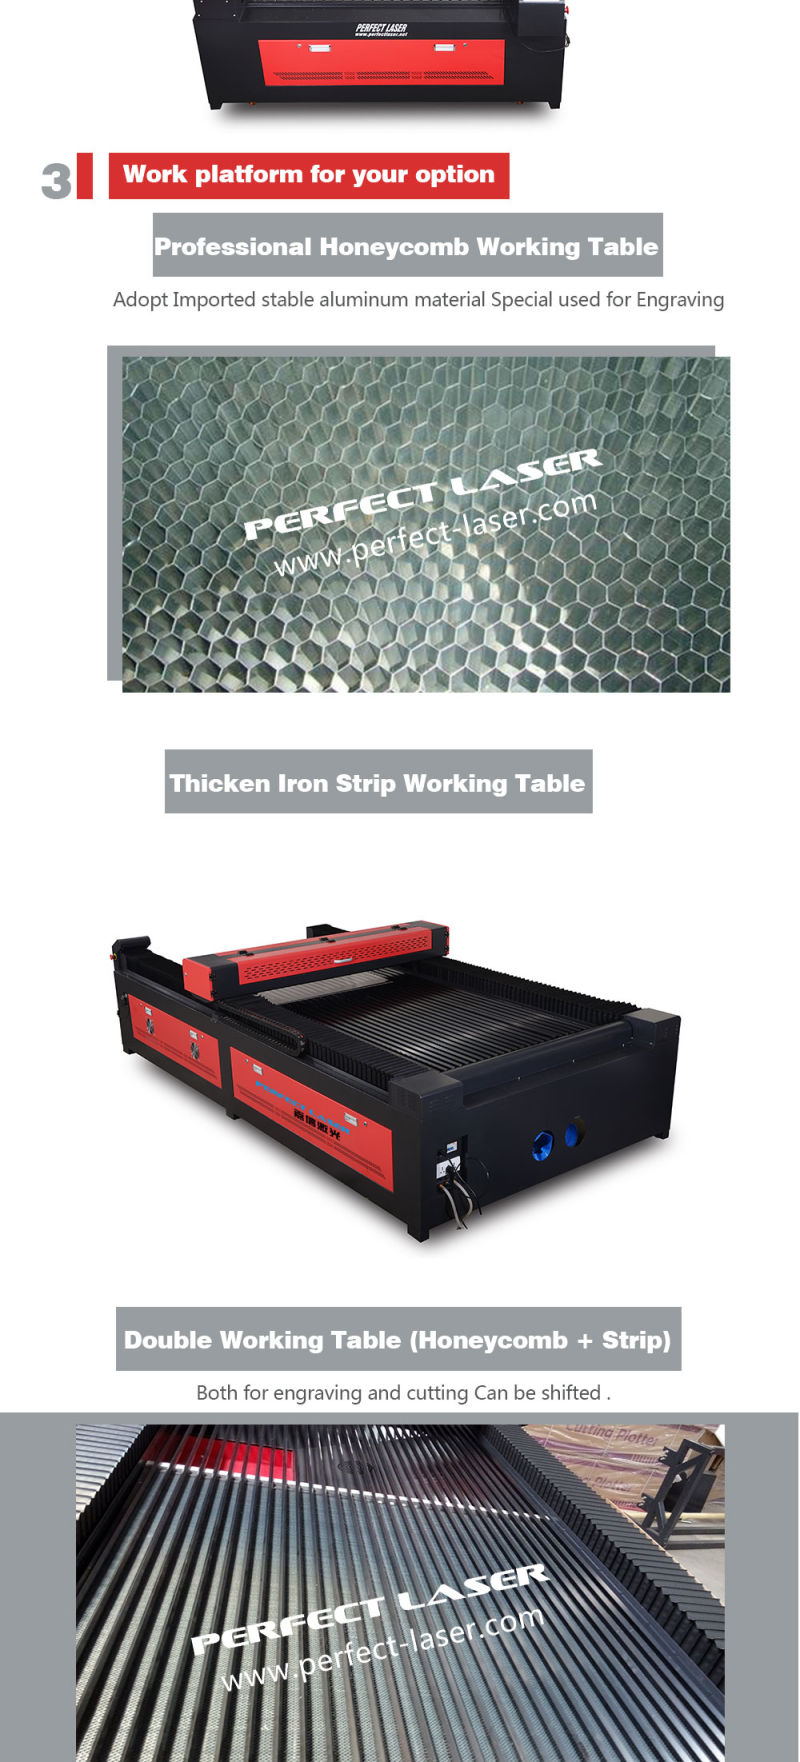 Pedk-160260 Companies Looking for Distributors China 100W/150W/175W CO2 Laser Cutter Machine